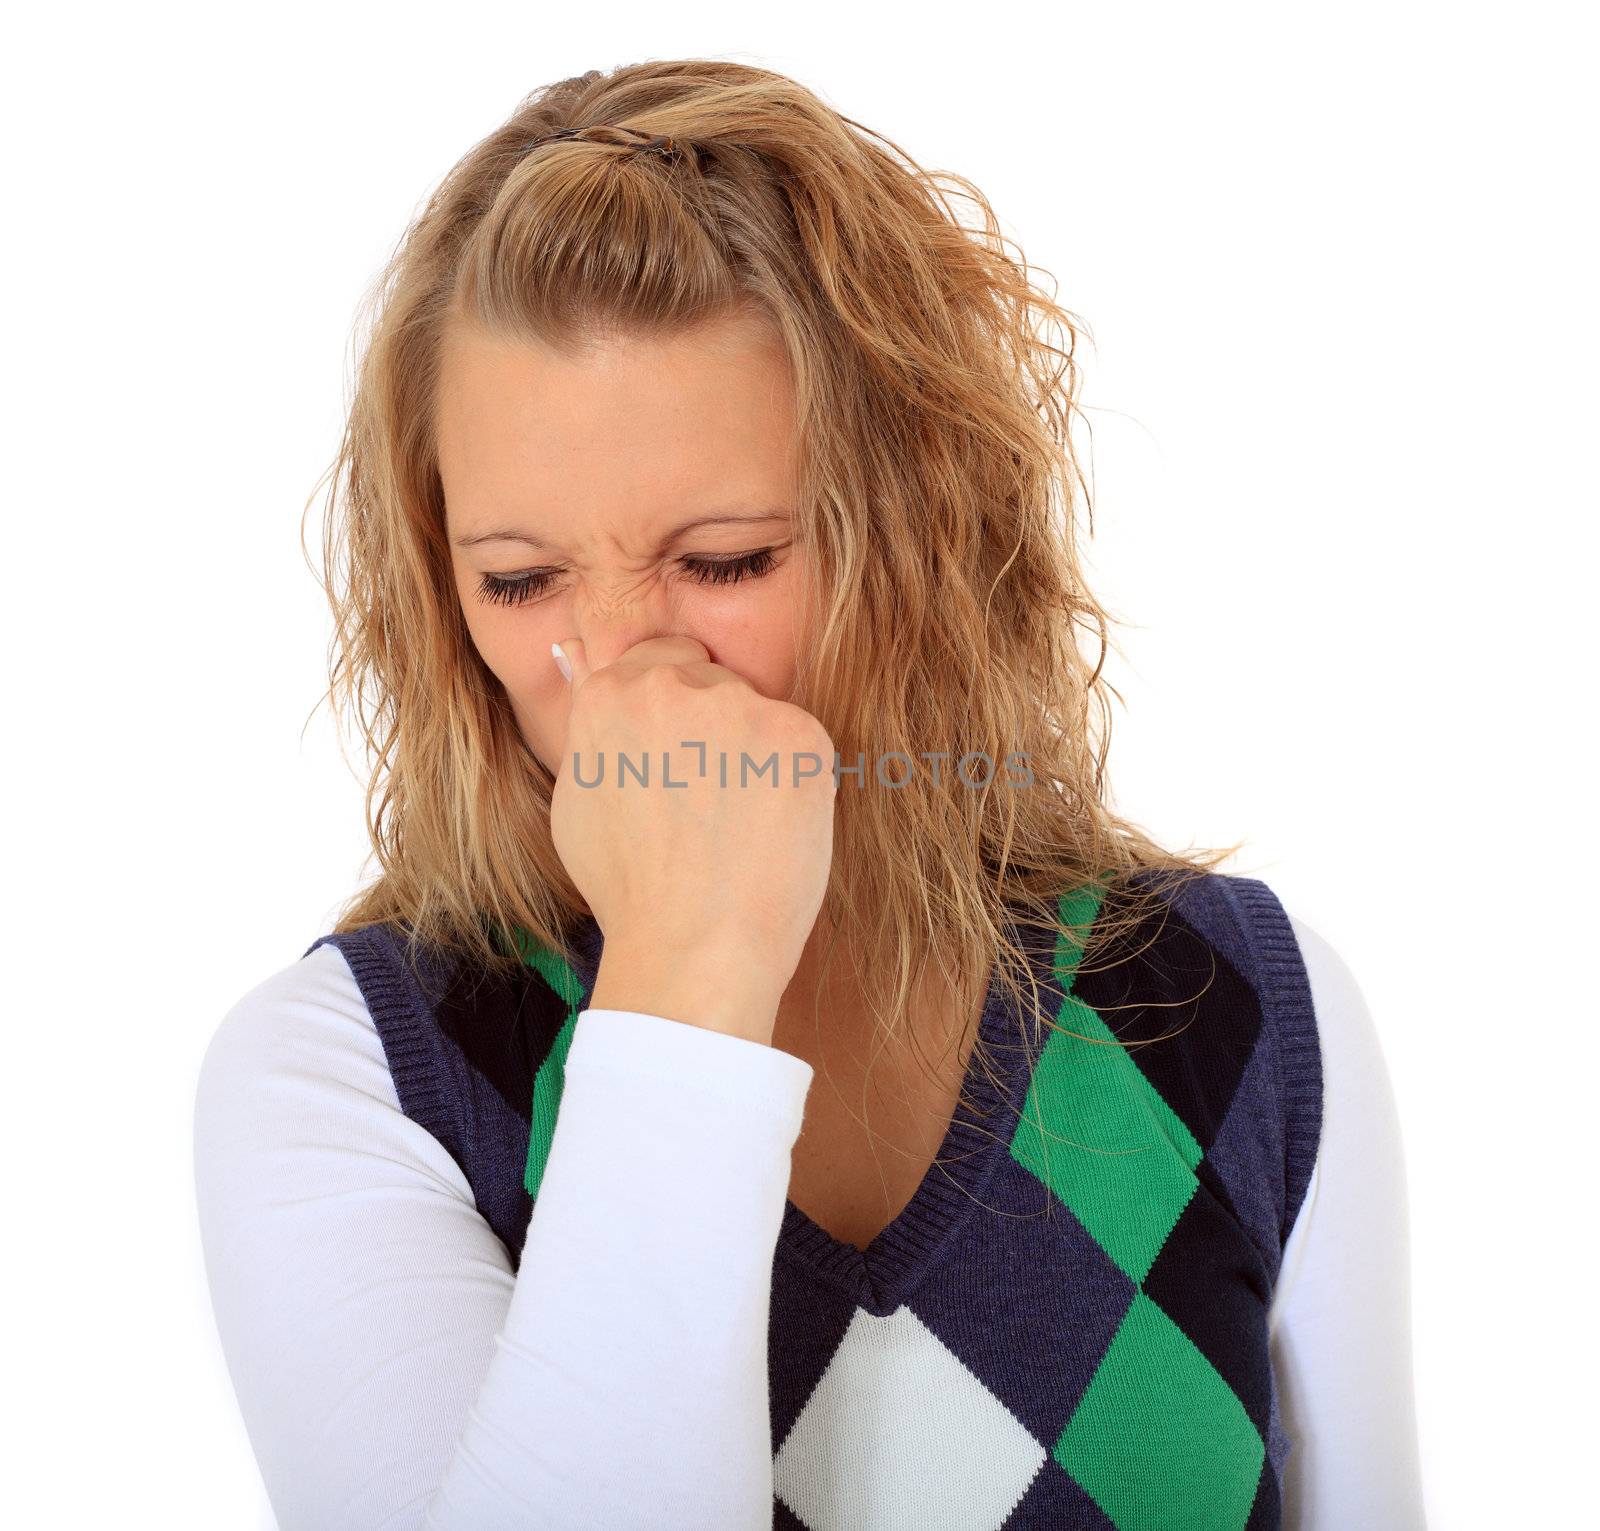 Attractive young woman sneezing. All on white background.